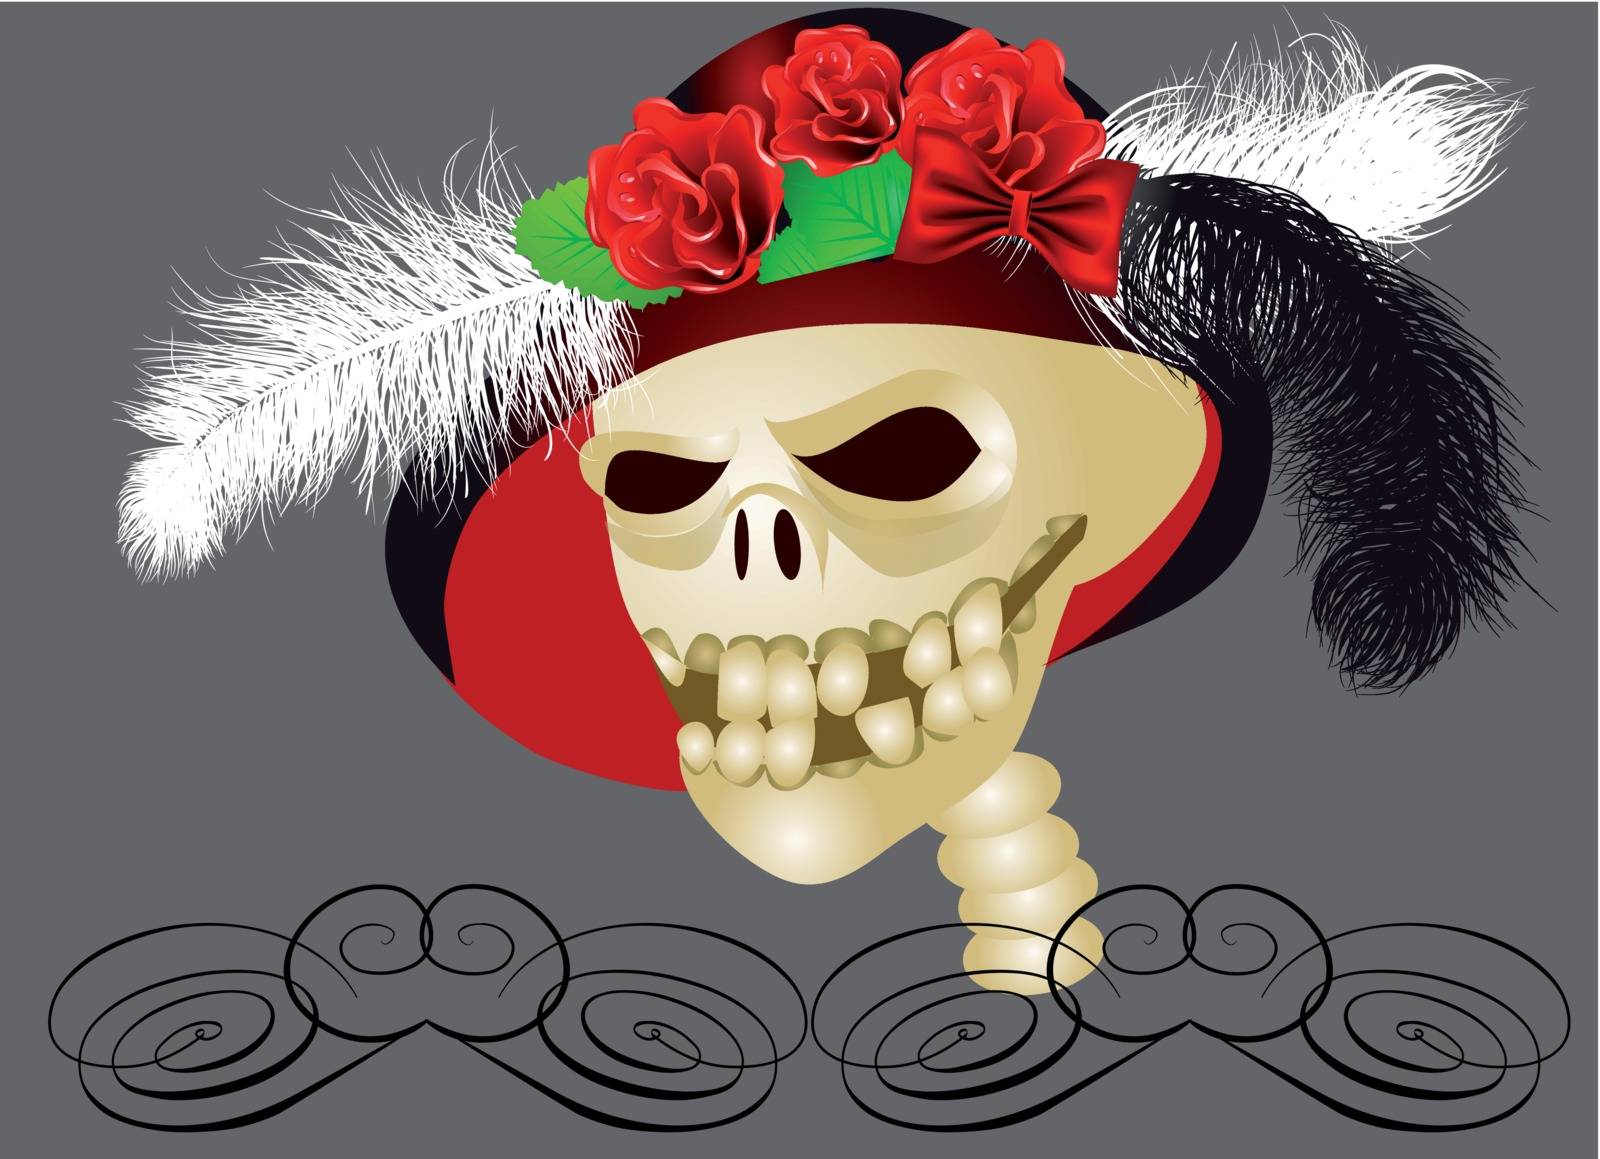 retro skull. human skull in a hat with roses